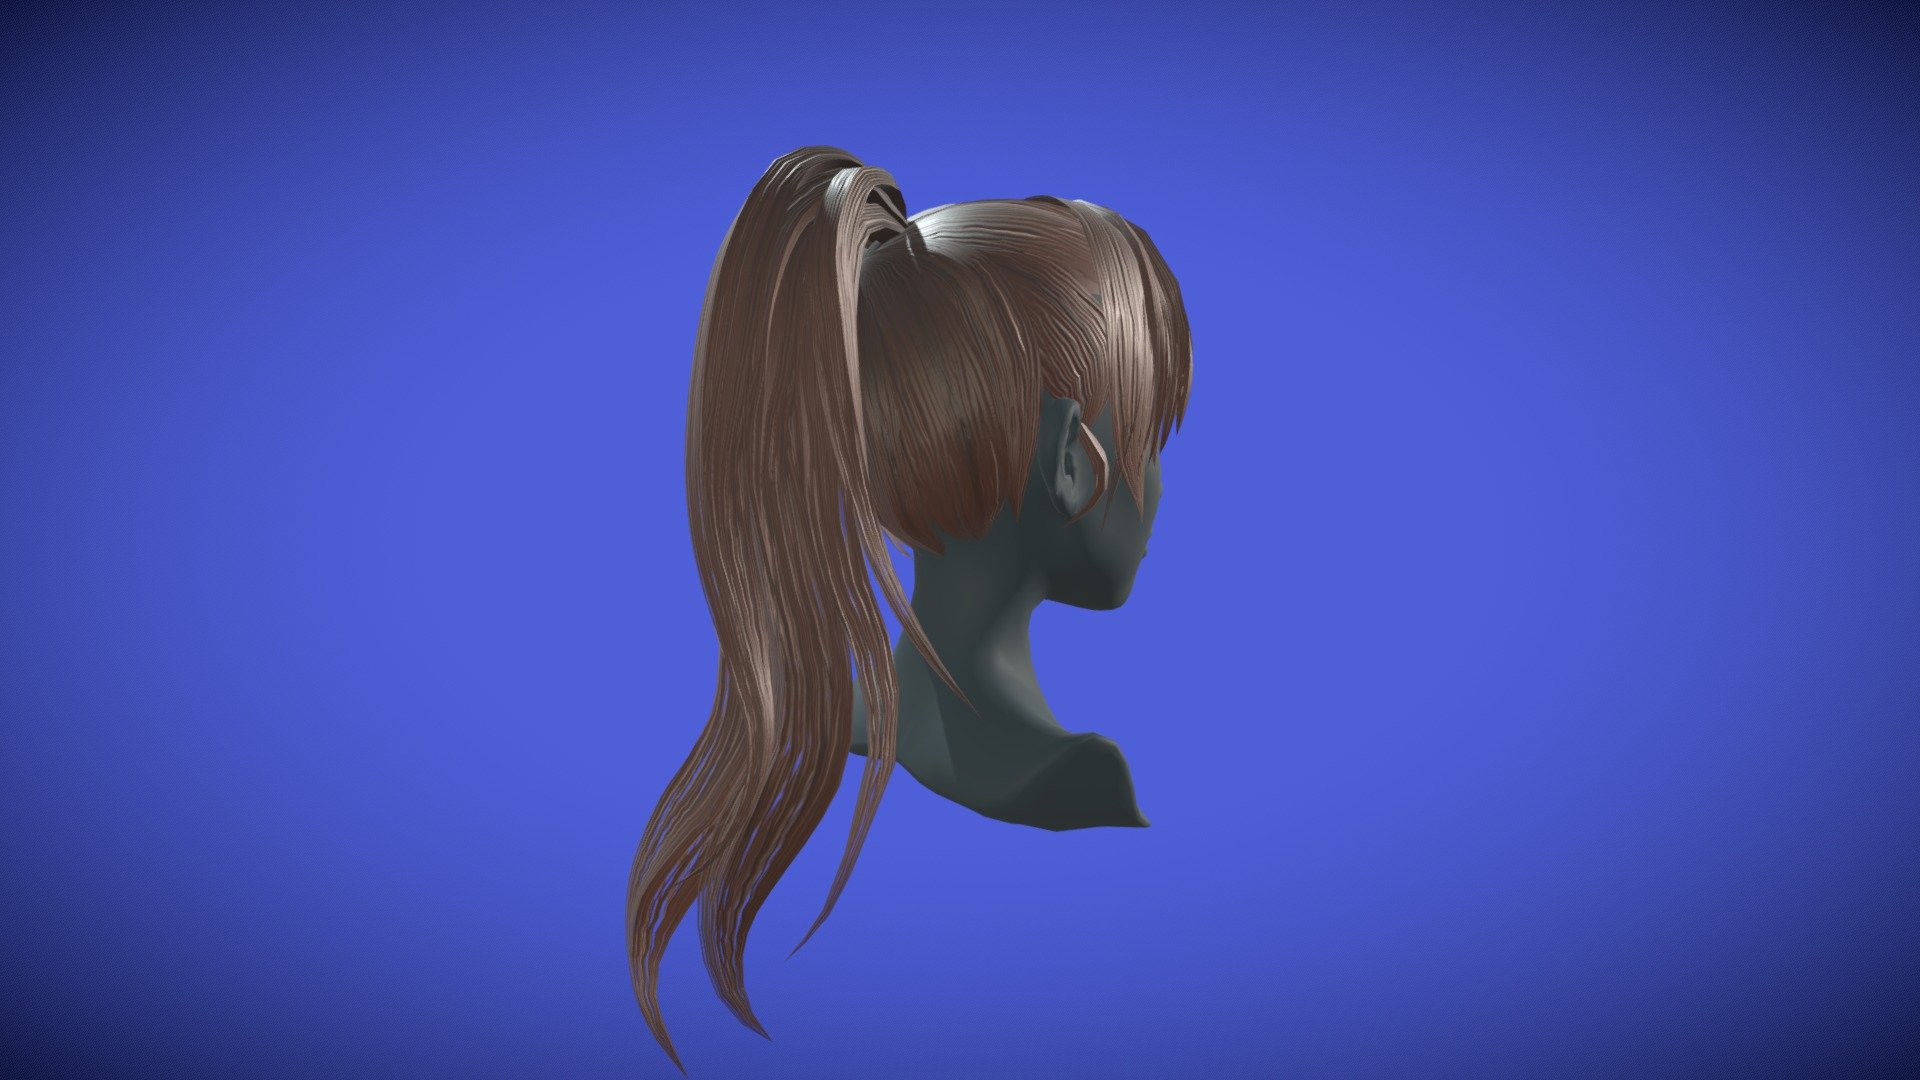 The Ponytail Package Include :

Include :
* 3D Unisex Bust ( 4,702 poly )
* Ponytail ( 3,600 poly )
* Alpha texutre
* Brown hair texture 
* White hair texture to make your customs colors
* Normal Map

If you have any question, don't be shy to reach me!

https://www.instagram.com/wamurya.soja/
https://www.artstation.com/alfons-lavoie/albums/all

This haircut is also part of my my Midpoly Hair Package! Available soon - Hair - Ponytail - 3D model by wamurya (@alfons) 3d model